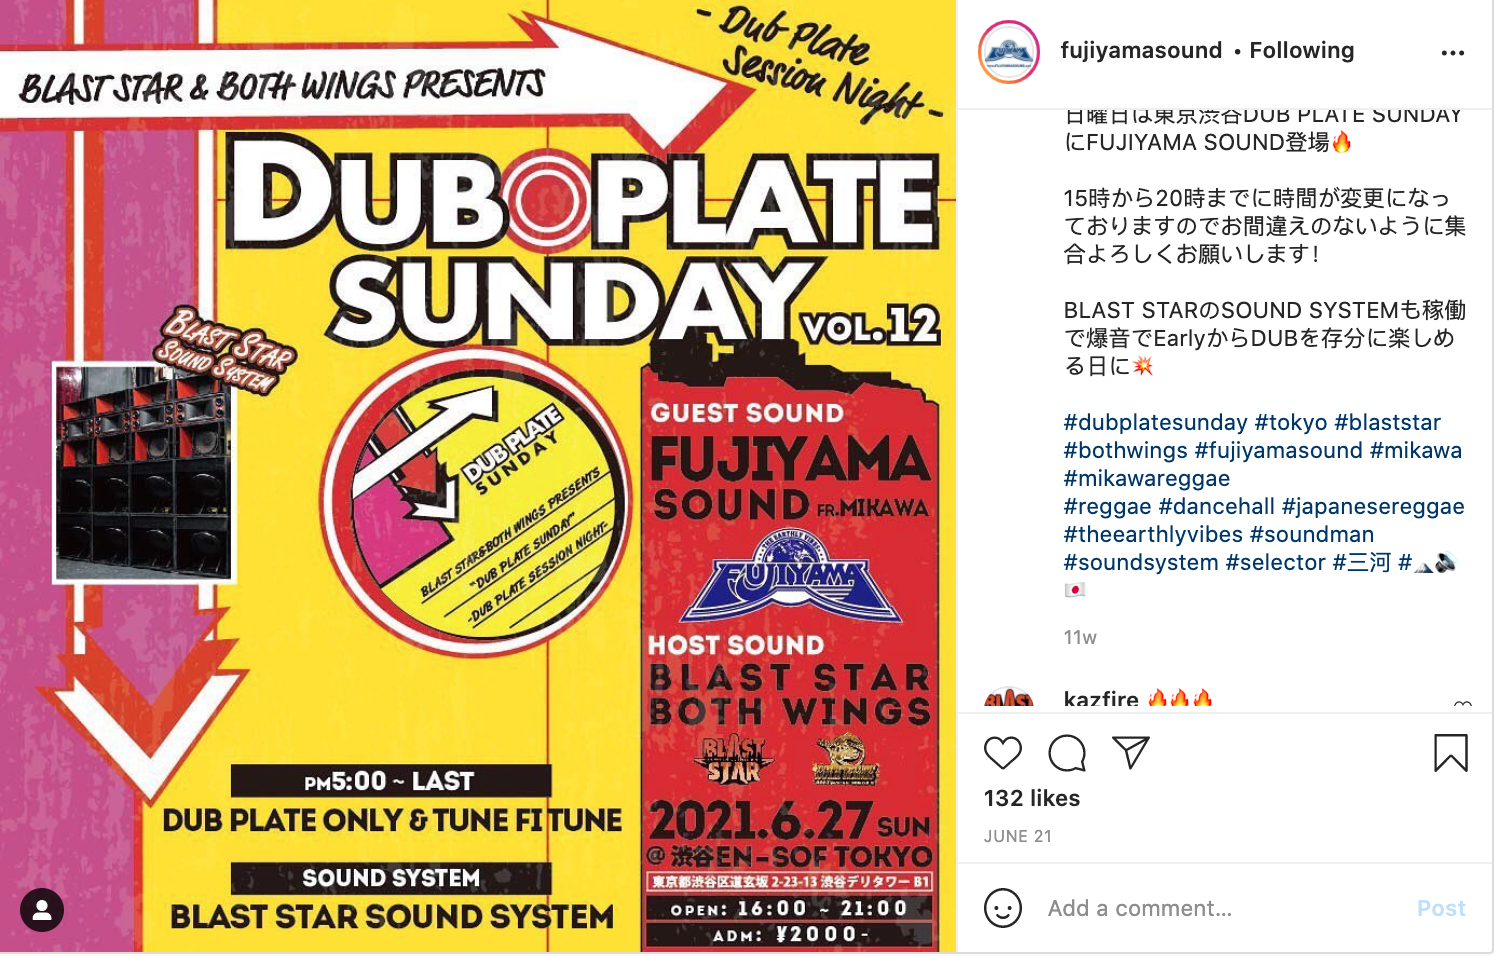 While not one of the more visible players among sound system accounts on Instagram, Fujiyama Sound, a Japan-based sound system was found through reliance on Instagram's algorithms, in tandem with the use of the hashtag #soundsystem